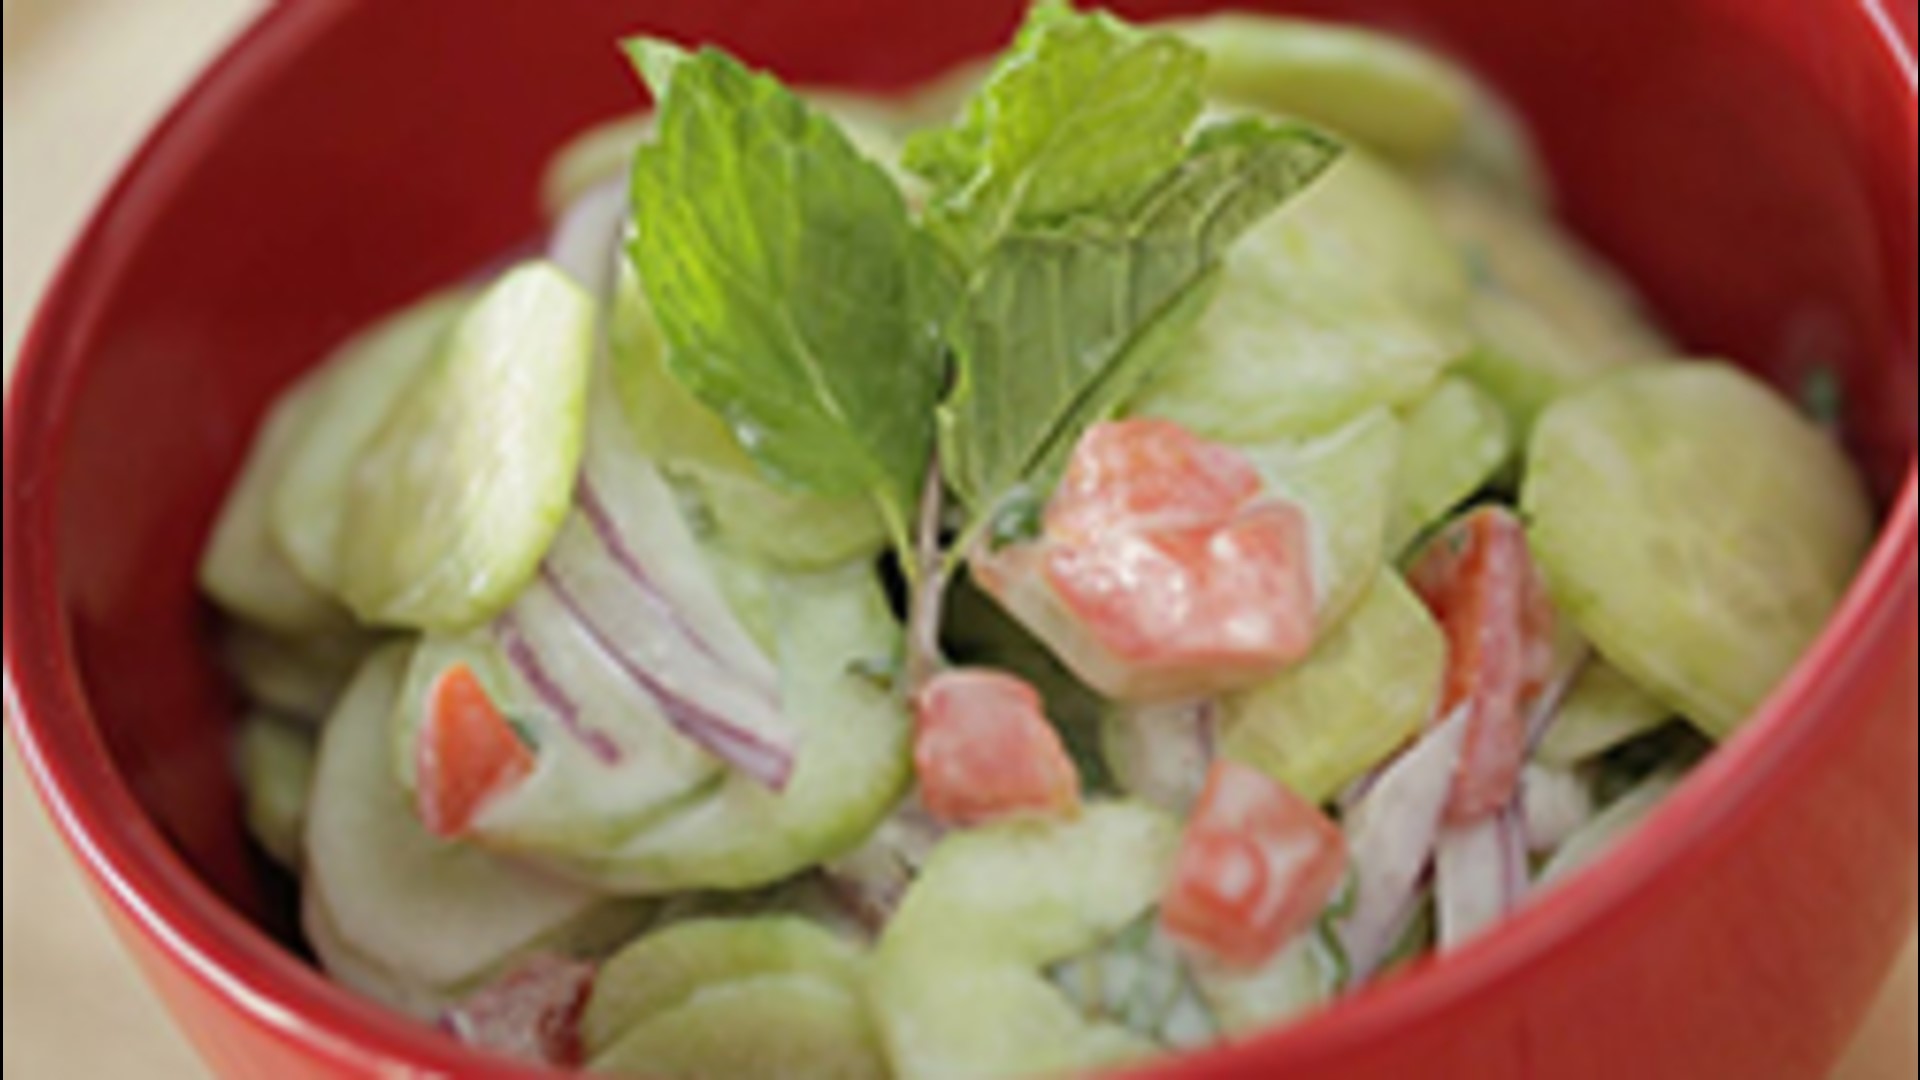 A super tasty side dish that won't break the bank. This refreshing creamy cucumber salad perfectly with heavy or light meals and will make your tastebuds go wild!